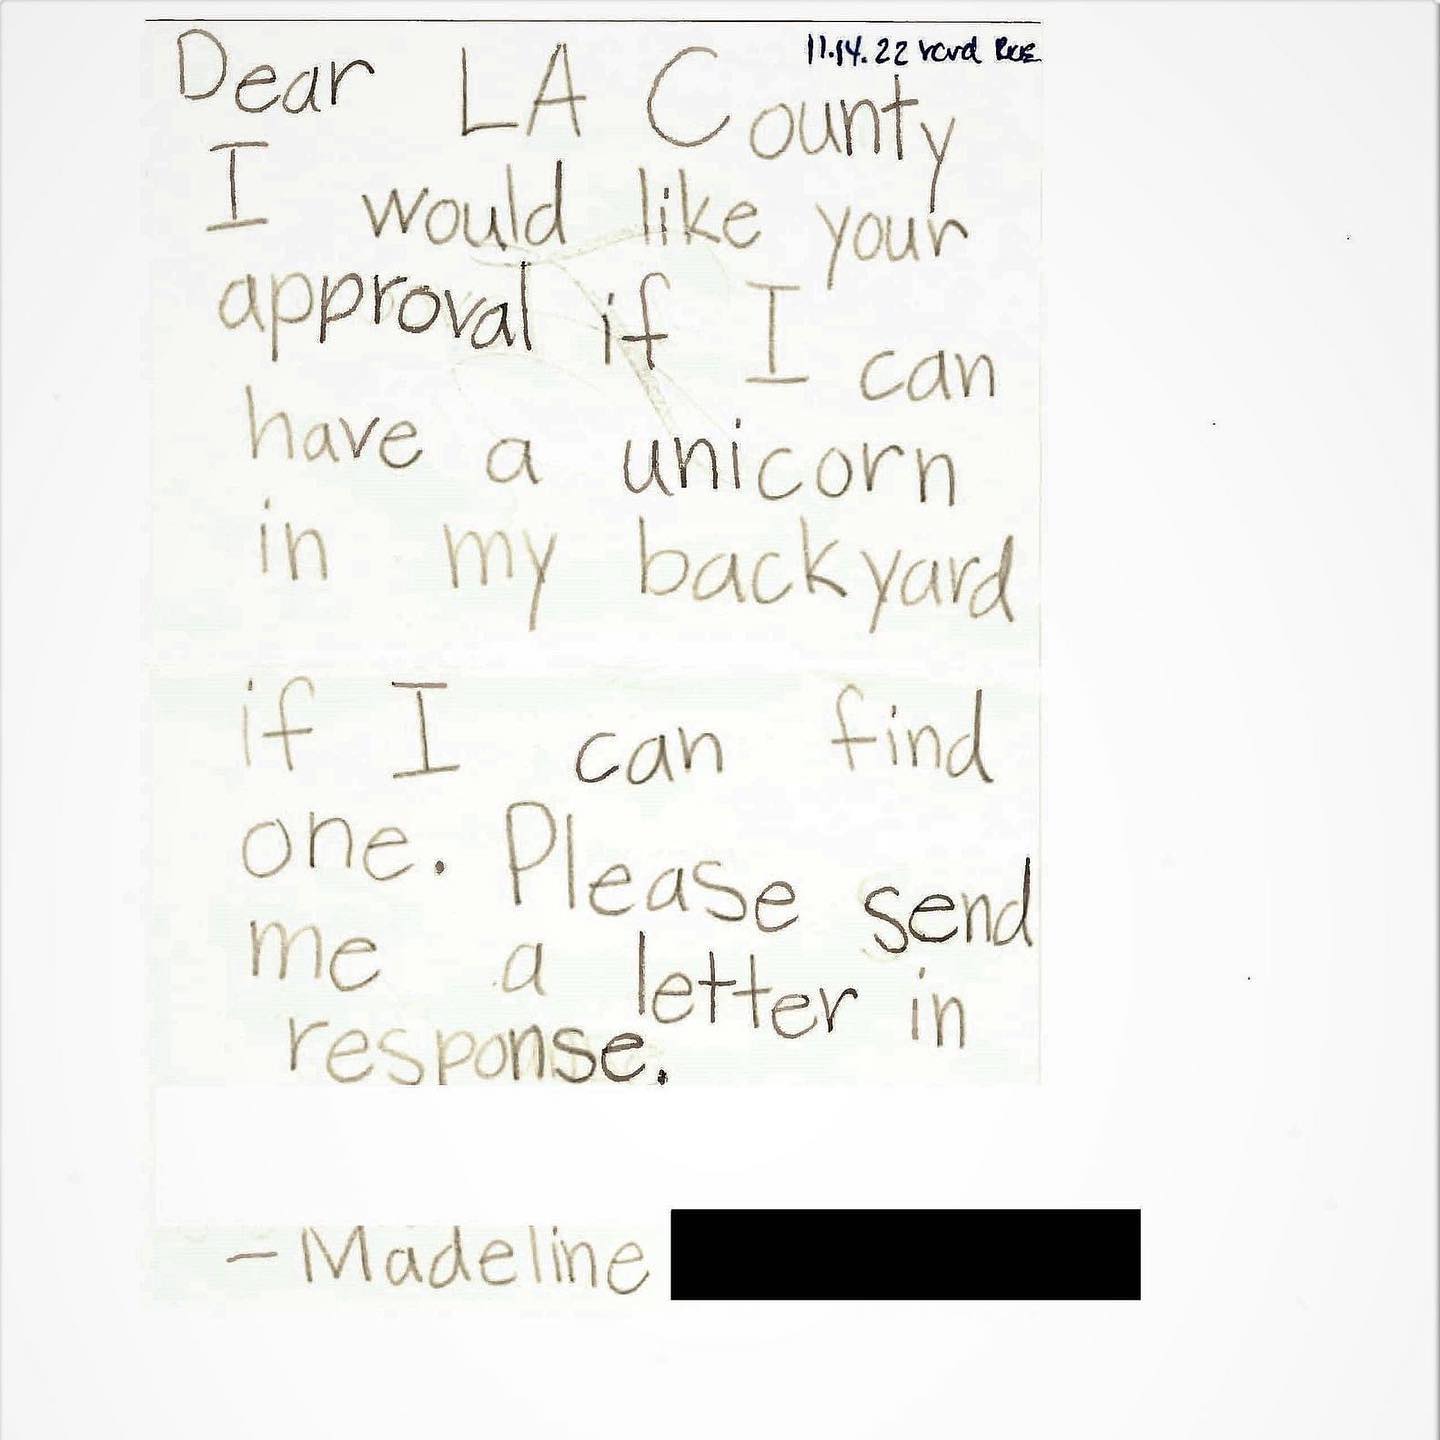 318559754 525274209642577 788453259134485901 n City Sends Adorable Response To Girl Asking Permission To Own A Unicorn